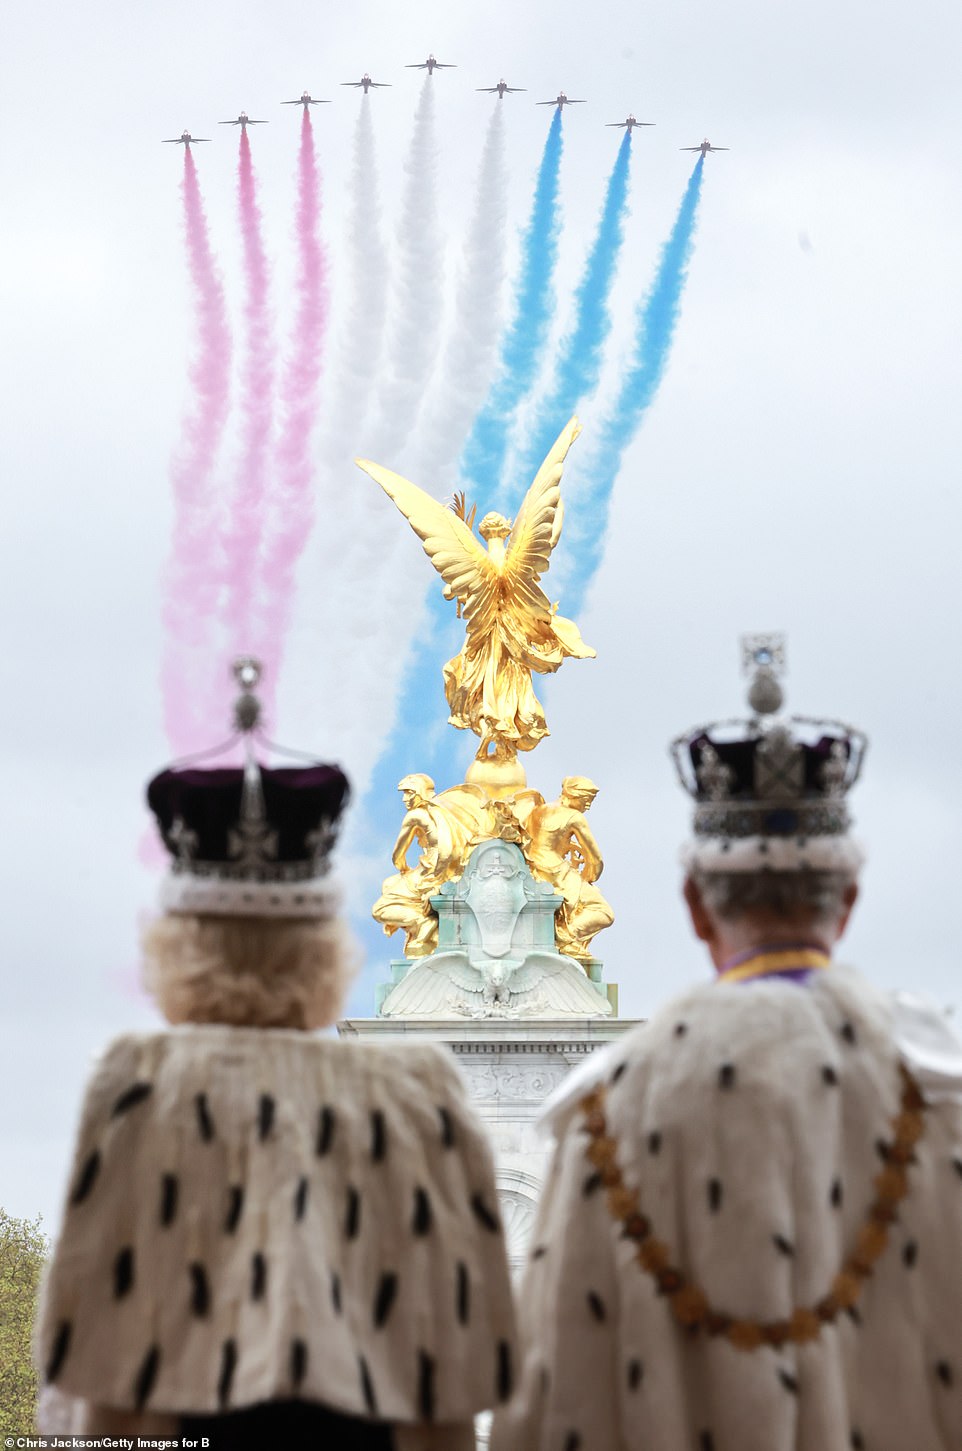 Charles and Camilla are seen admiring the Red Arrows' flypast which took place during the Coronation today in another image released by Buckingham Palace